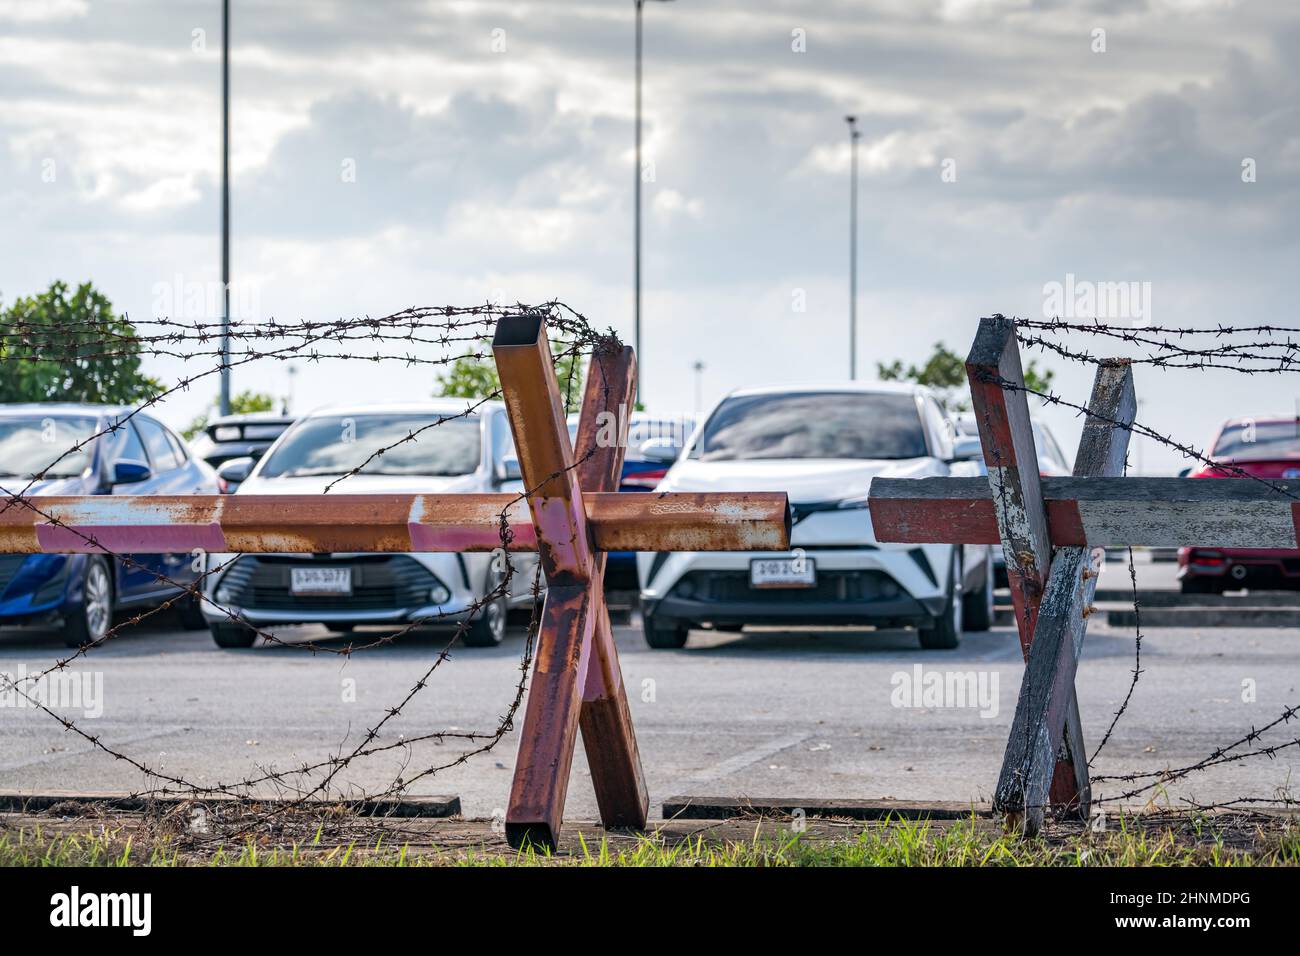 Barbed wire fence of the parking lot. Cars parked at outdoor car parking lot. Car was seized by a lending company. Financial crisis impact on car loan. Used car business. Auto leasing and insurance. Stock Photo